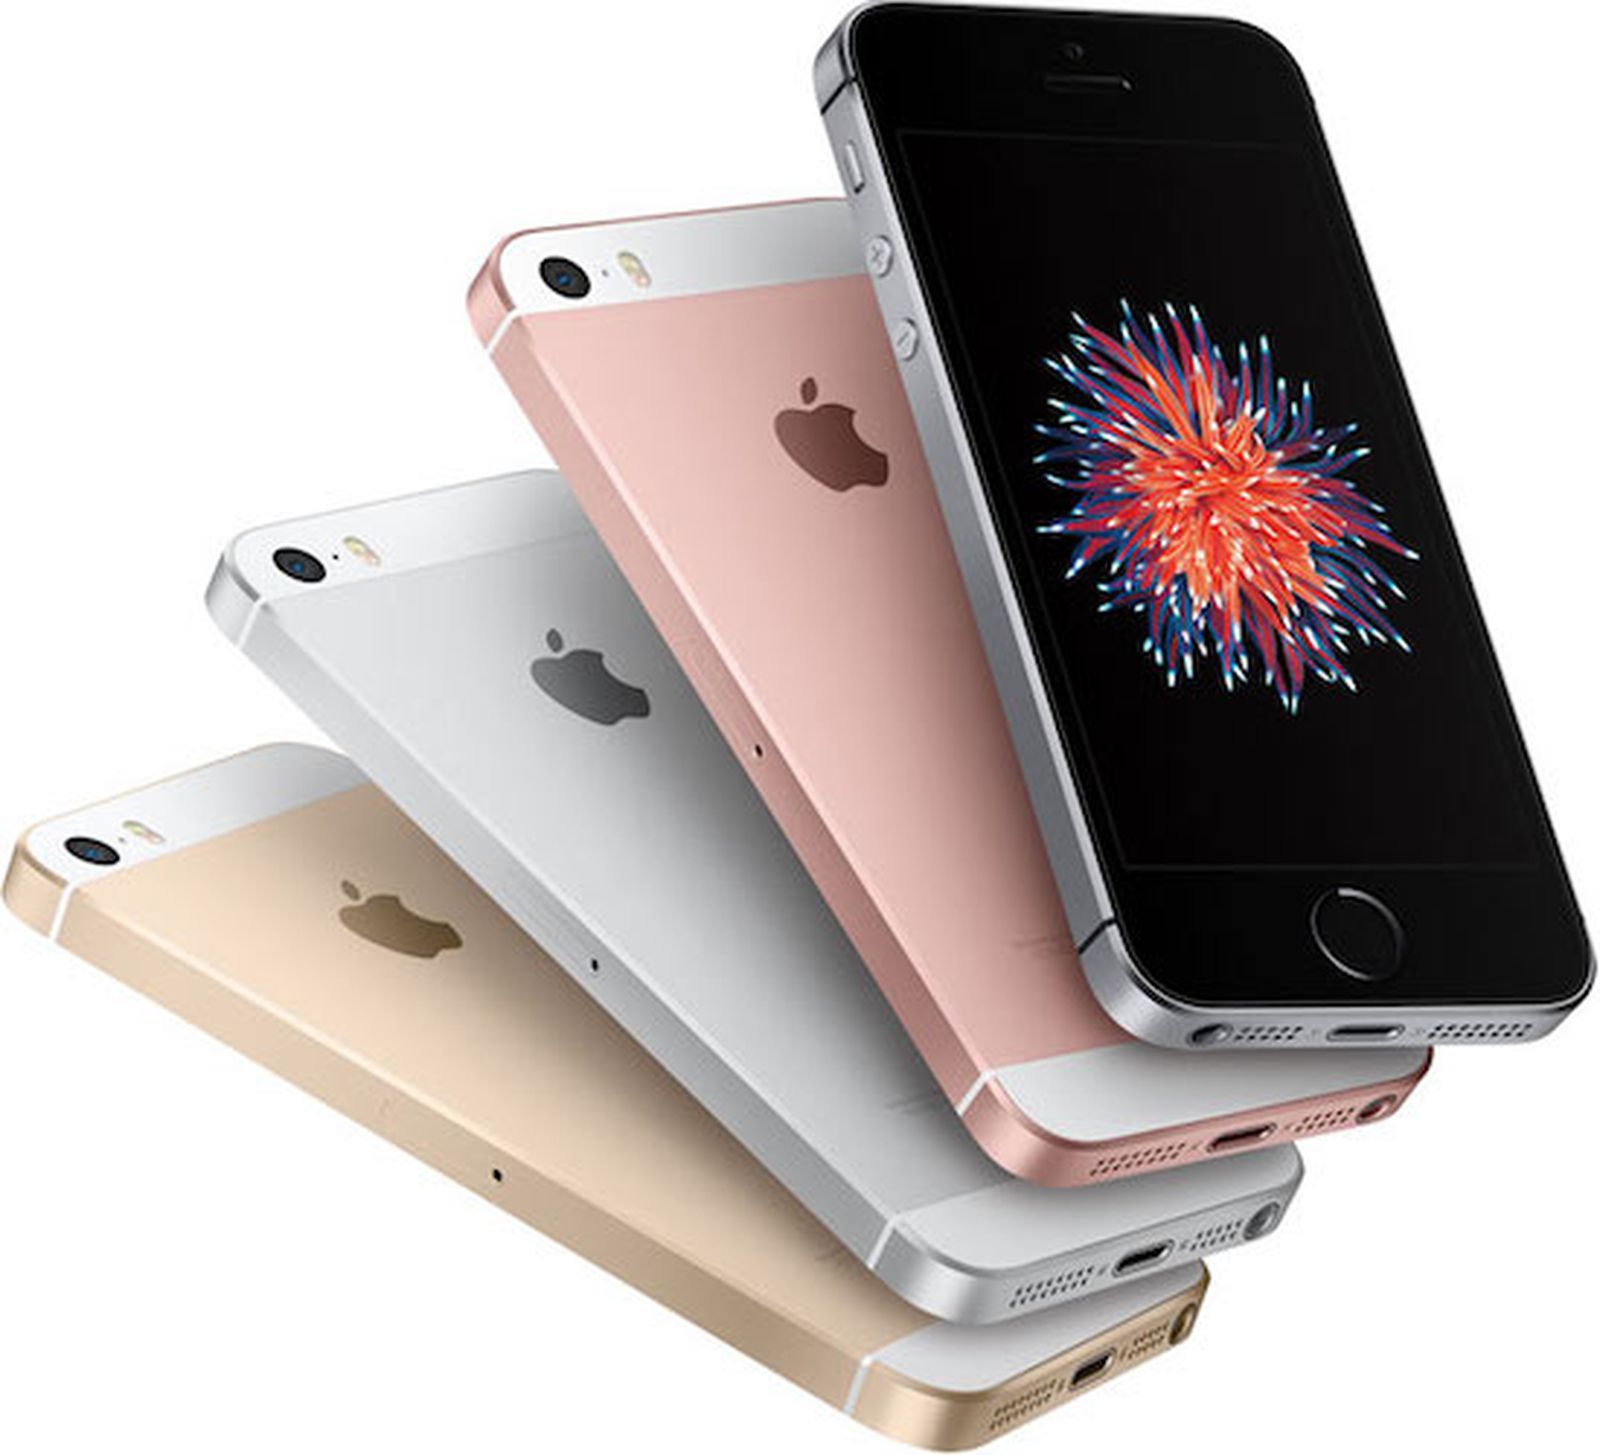 Sketchy Rumor Claims 'iPhone SE 2' Could Feature a Glass Back and 